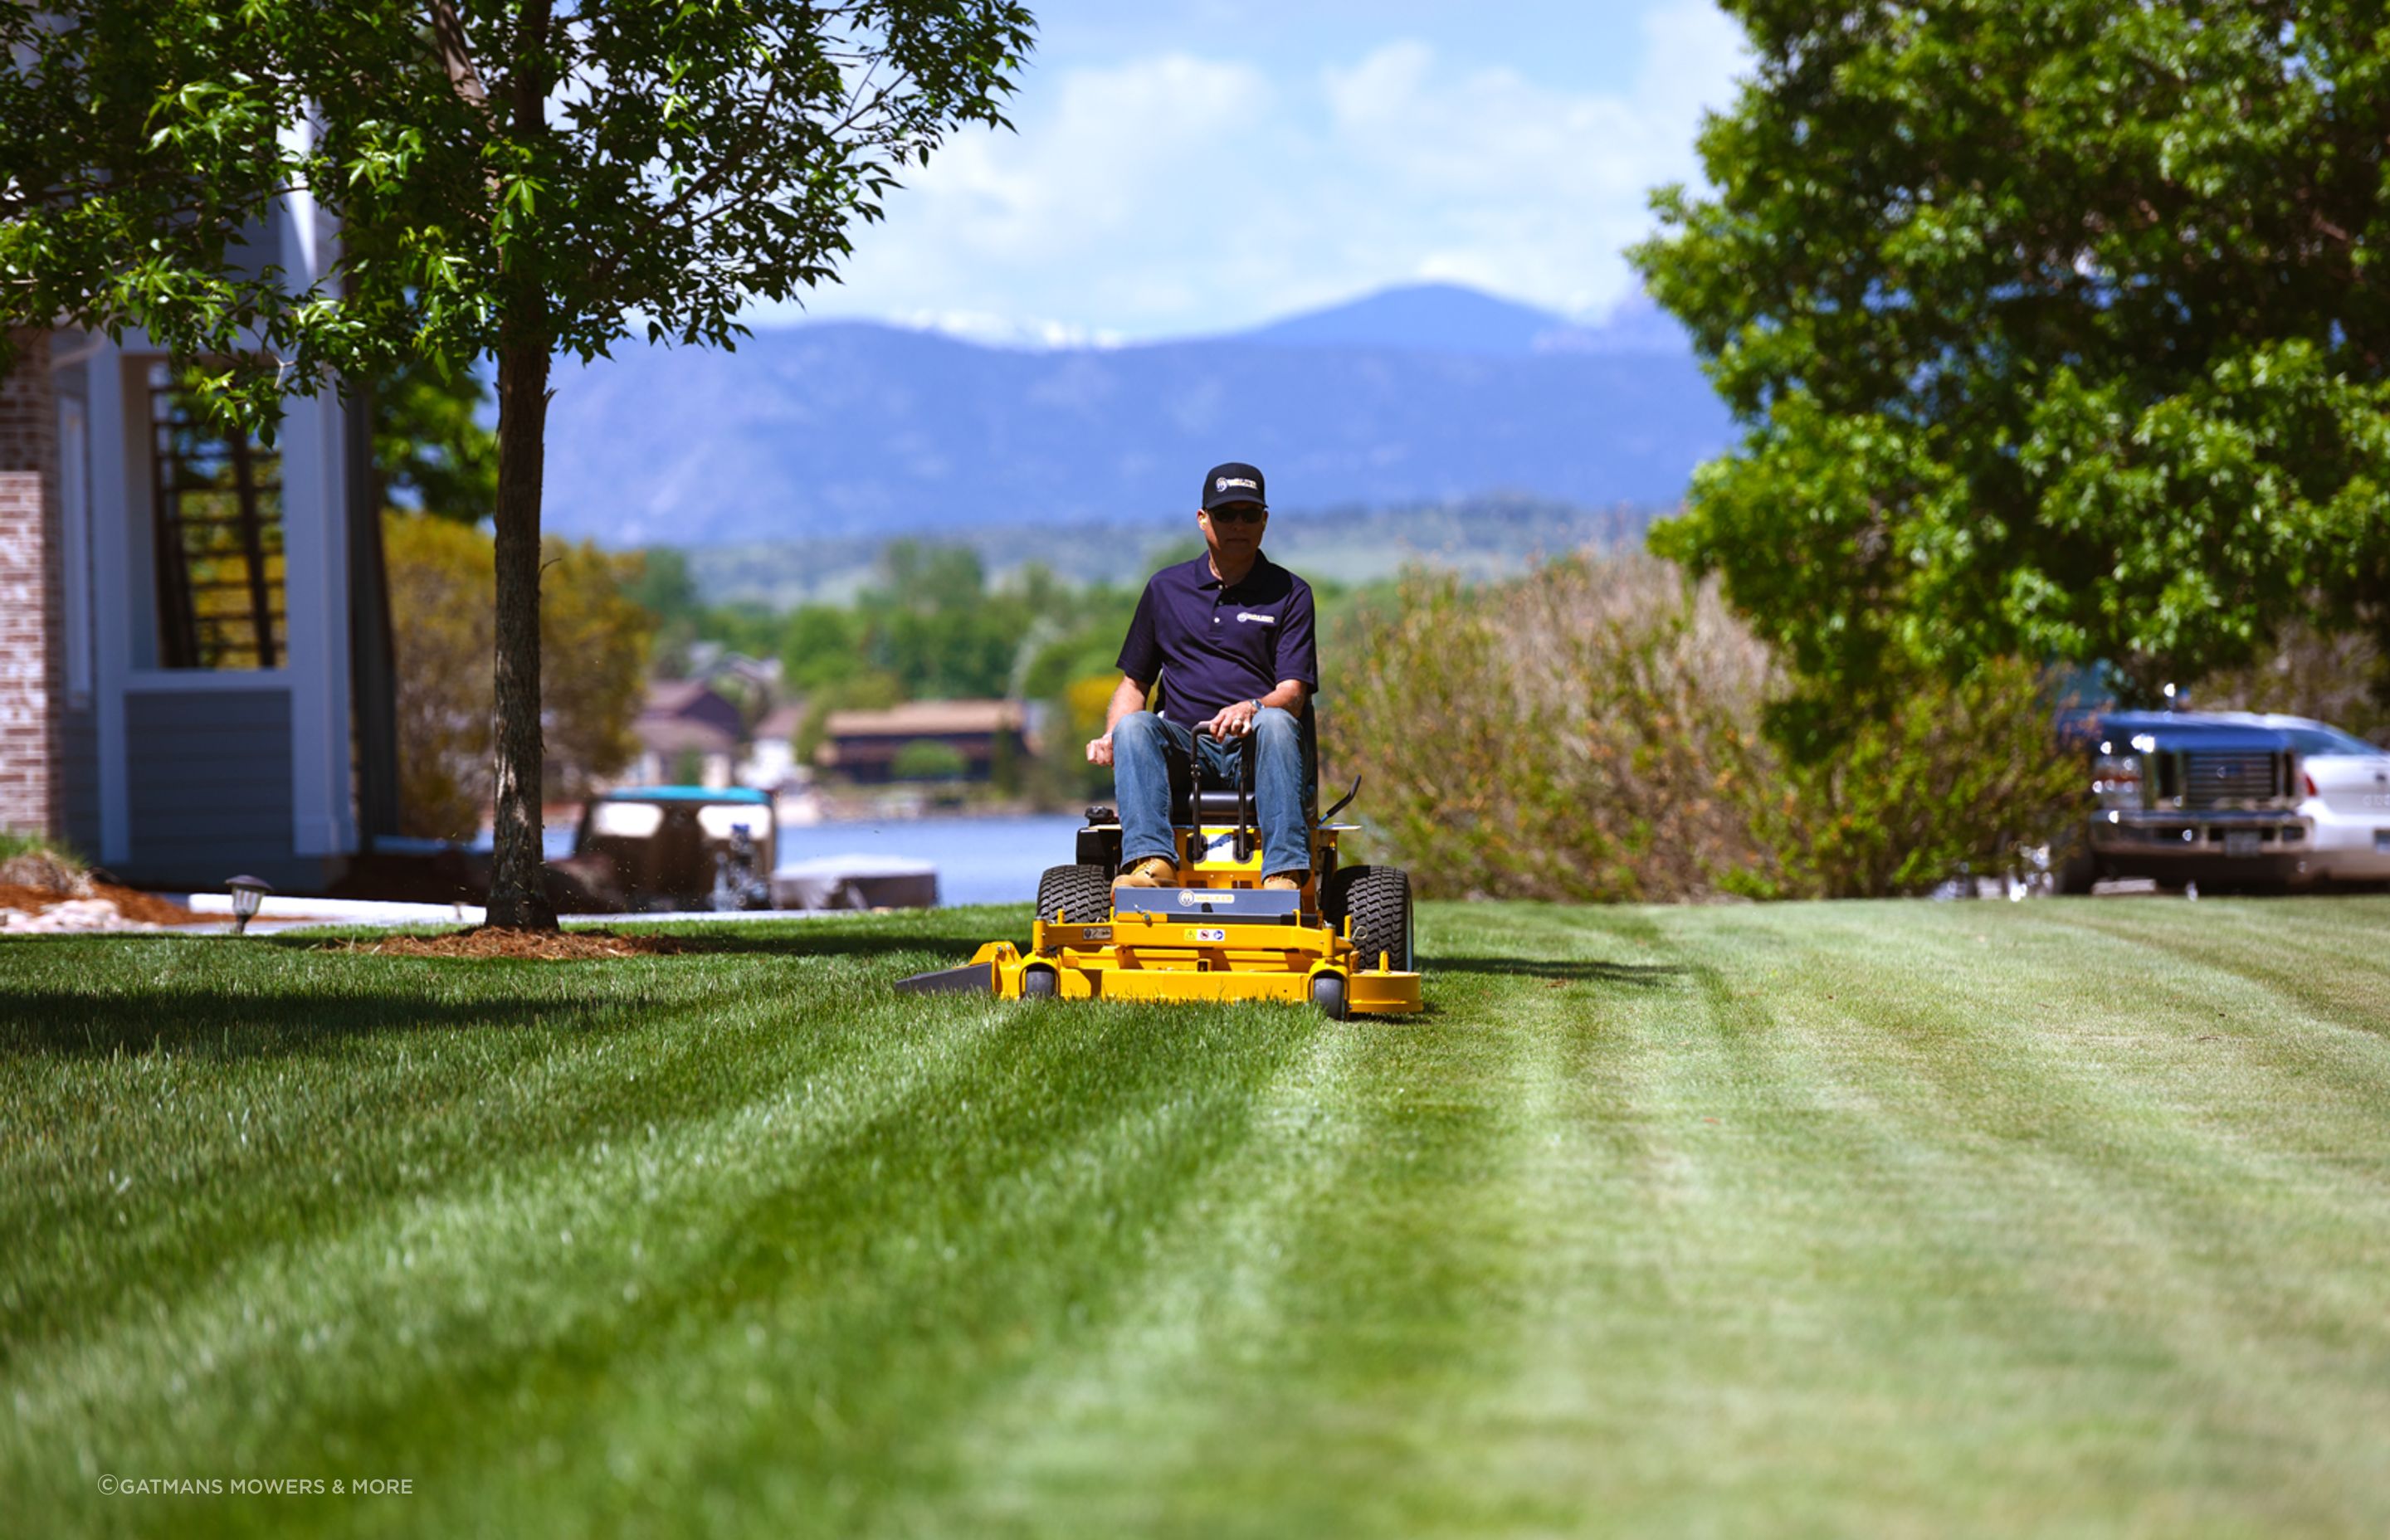 The R21 is a versatile mower that can cover a wide area in a short amount of time and can handle a variety of terrain types.